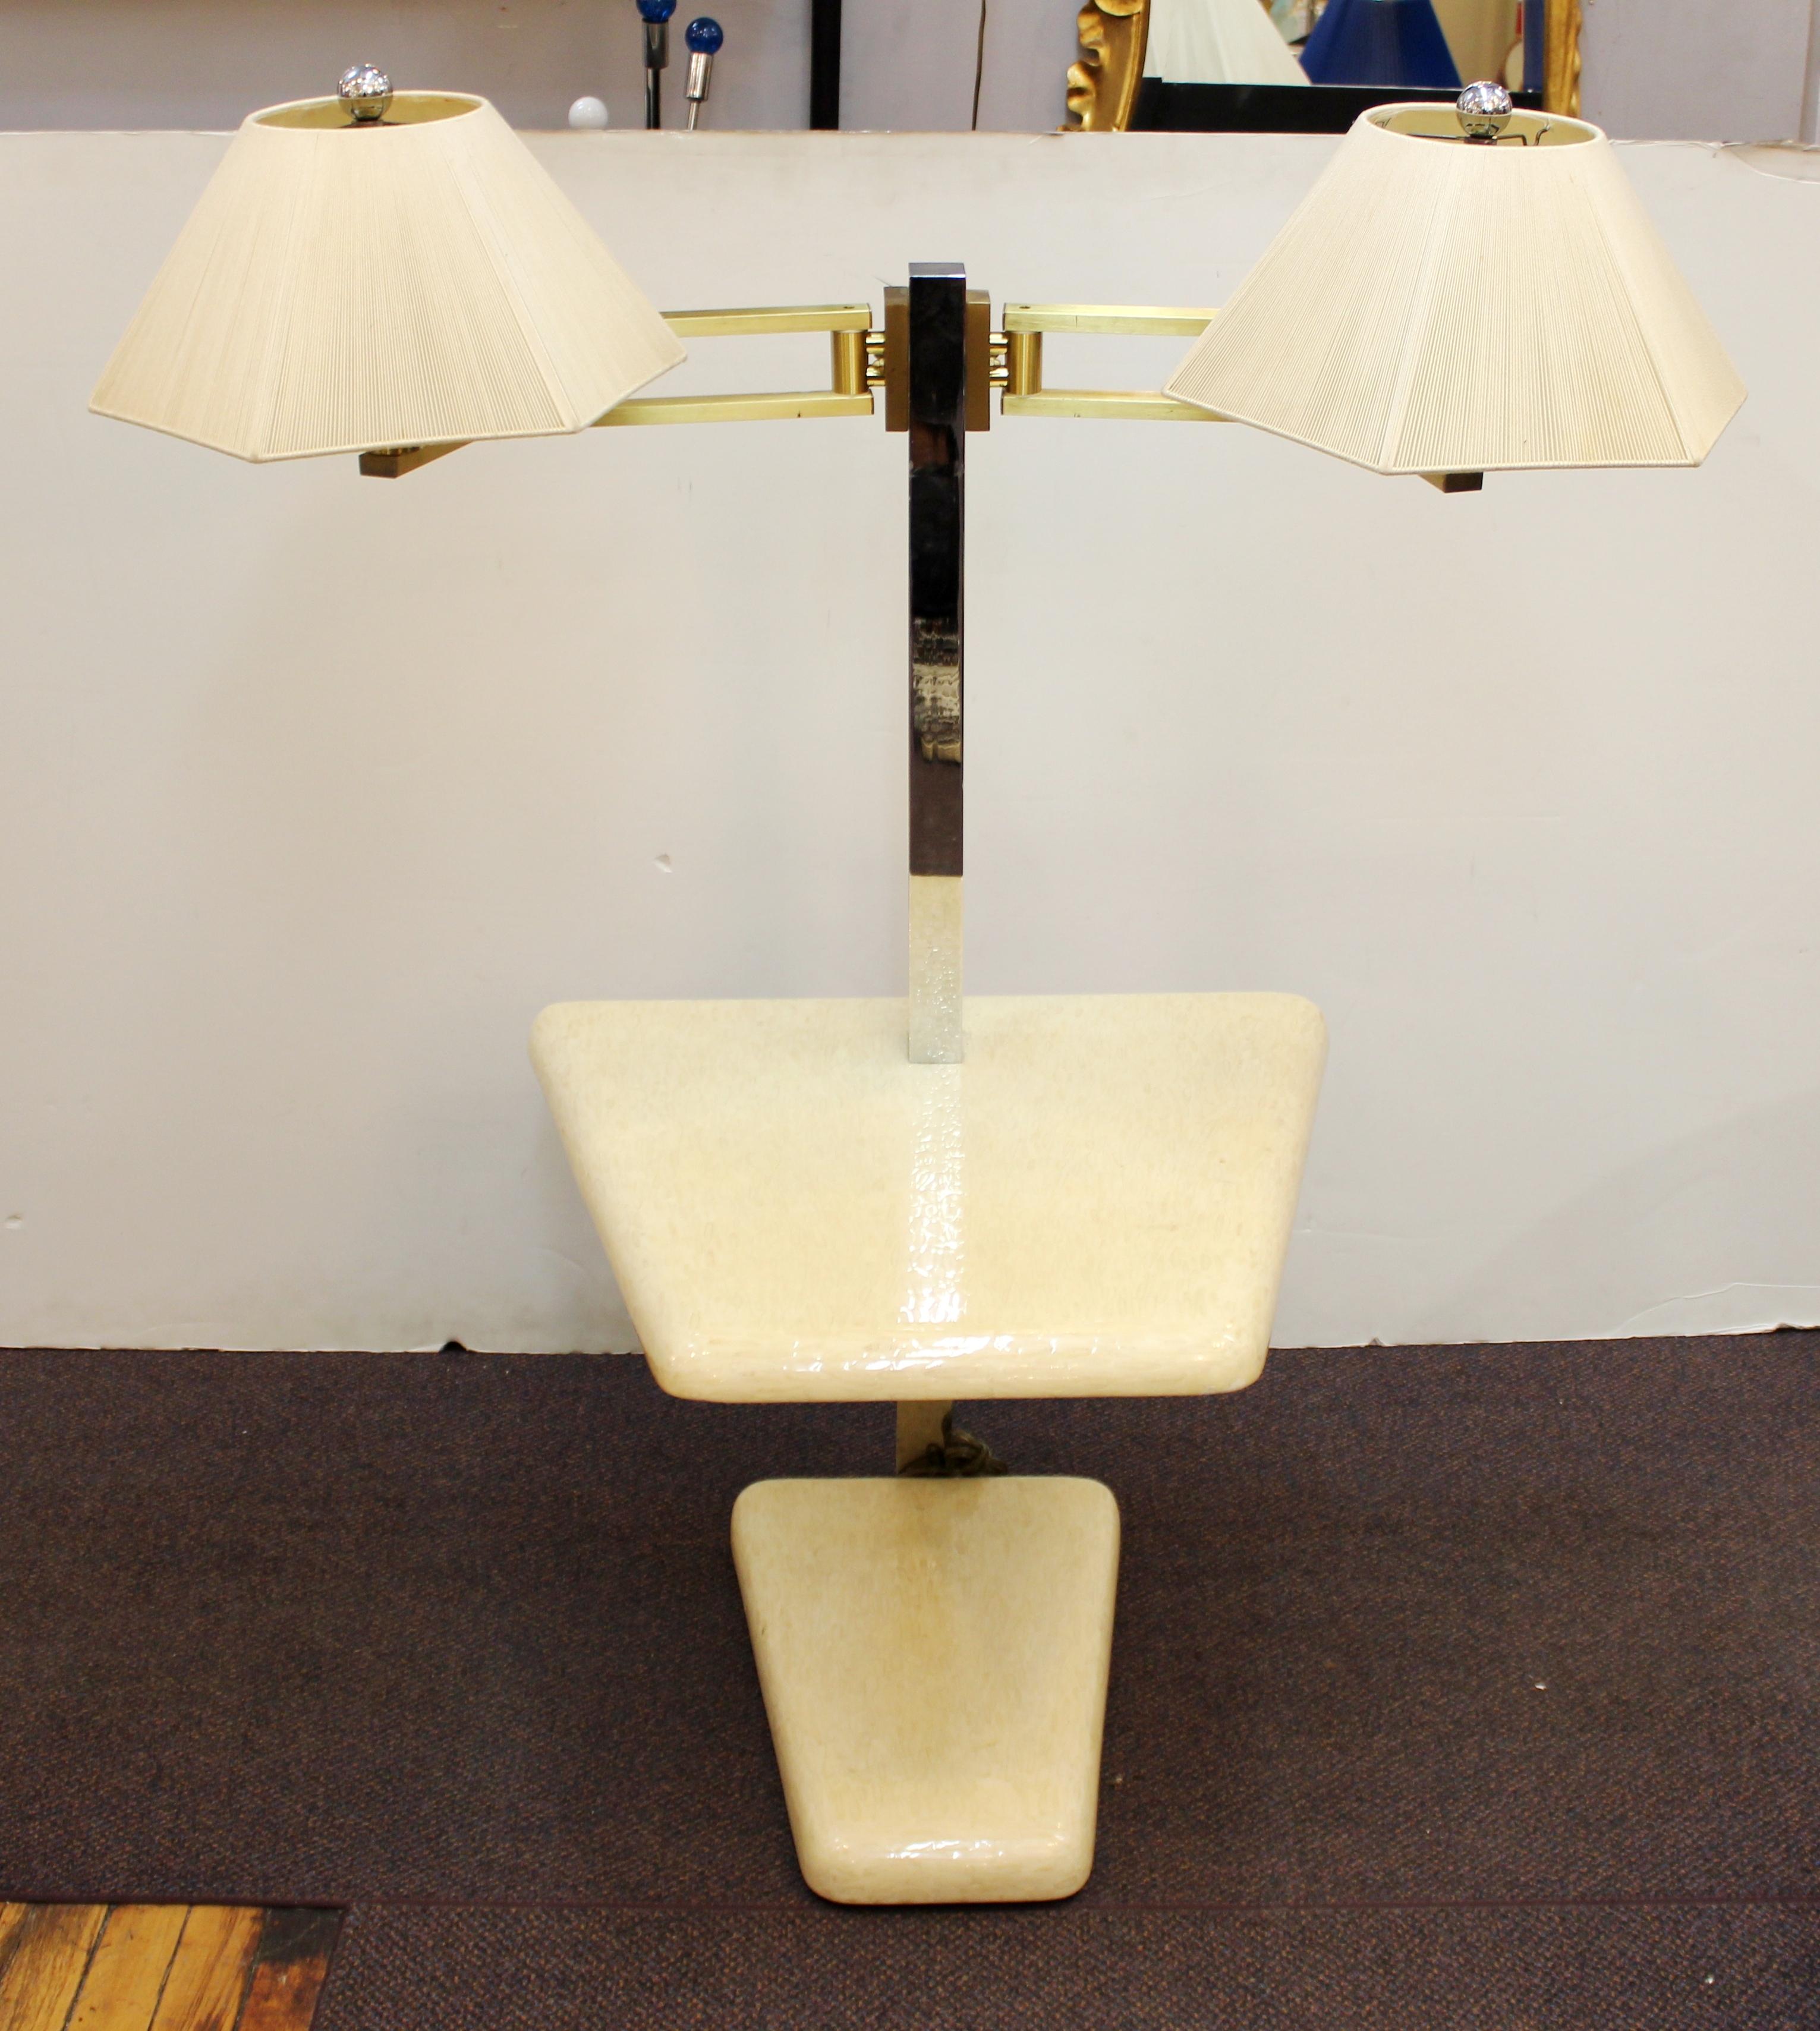 Modern side table or end table with attached double lamps and a tessellated bone surface designed by Enrique Garcel in the 1970s. The lamps come with lampshades and are articulated. In great vintage condition with some age-appropriate wear.